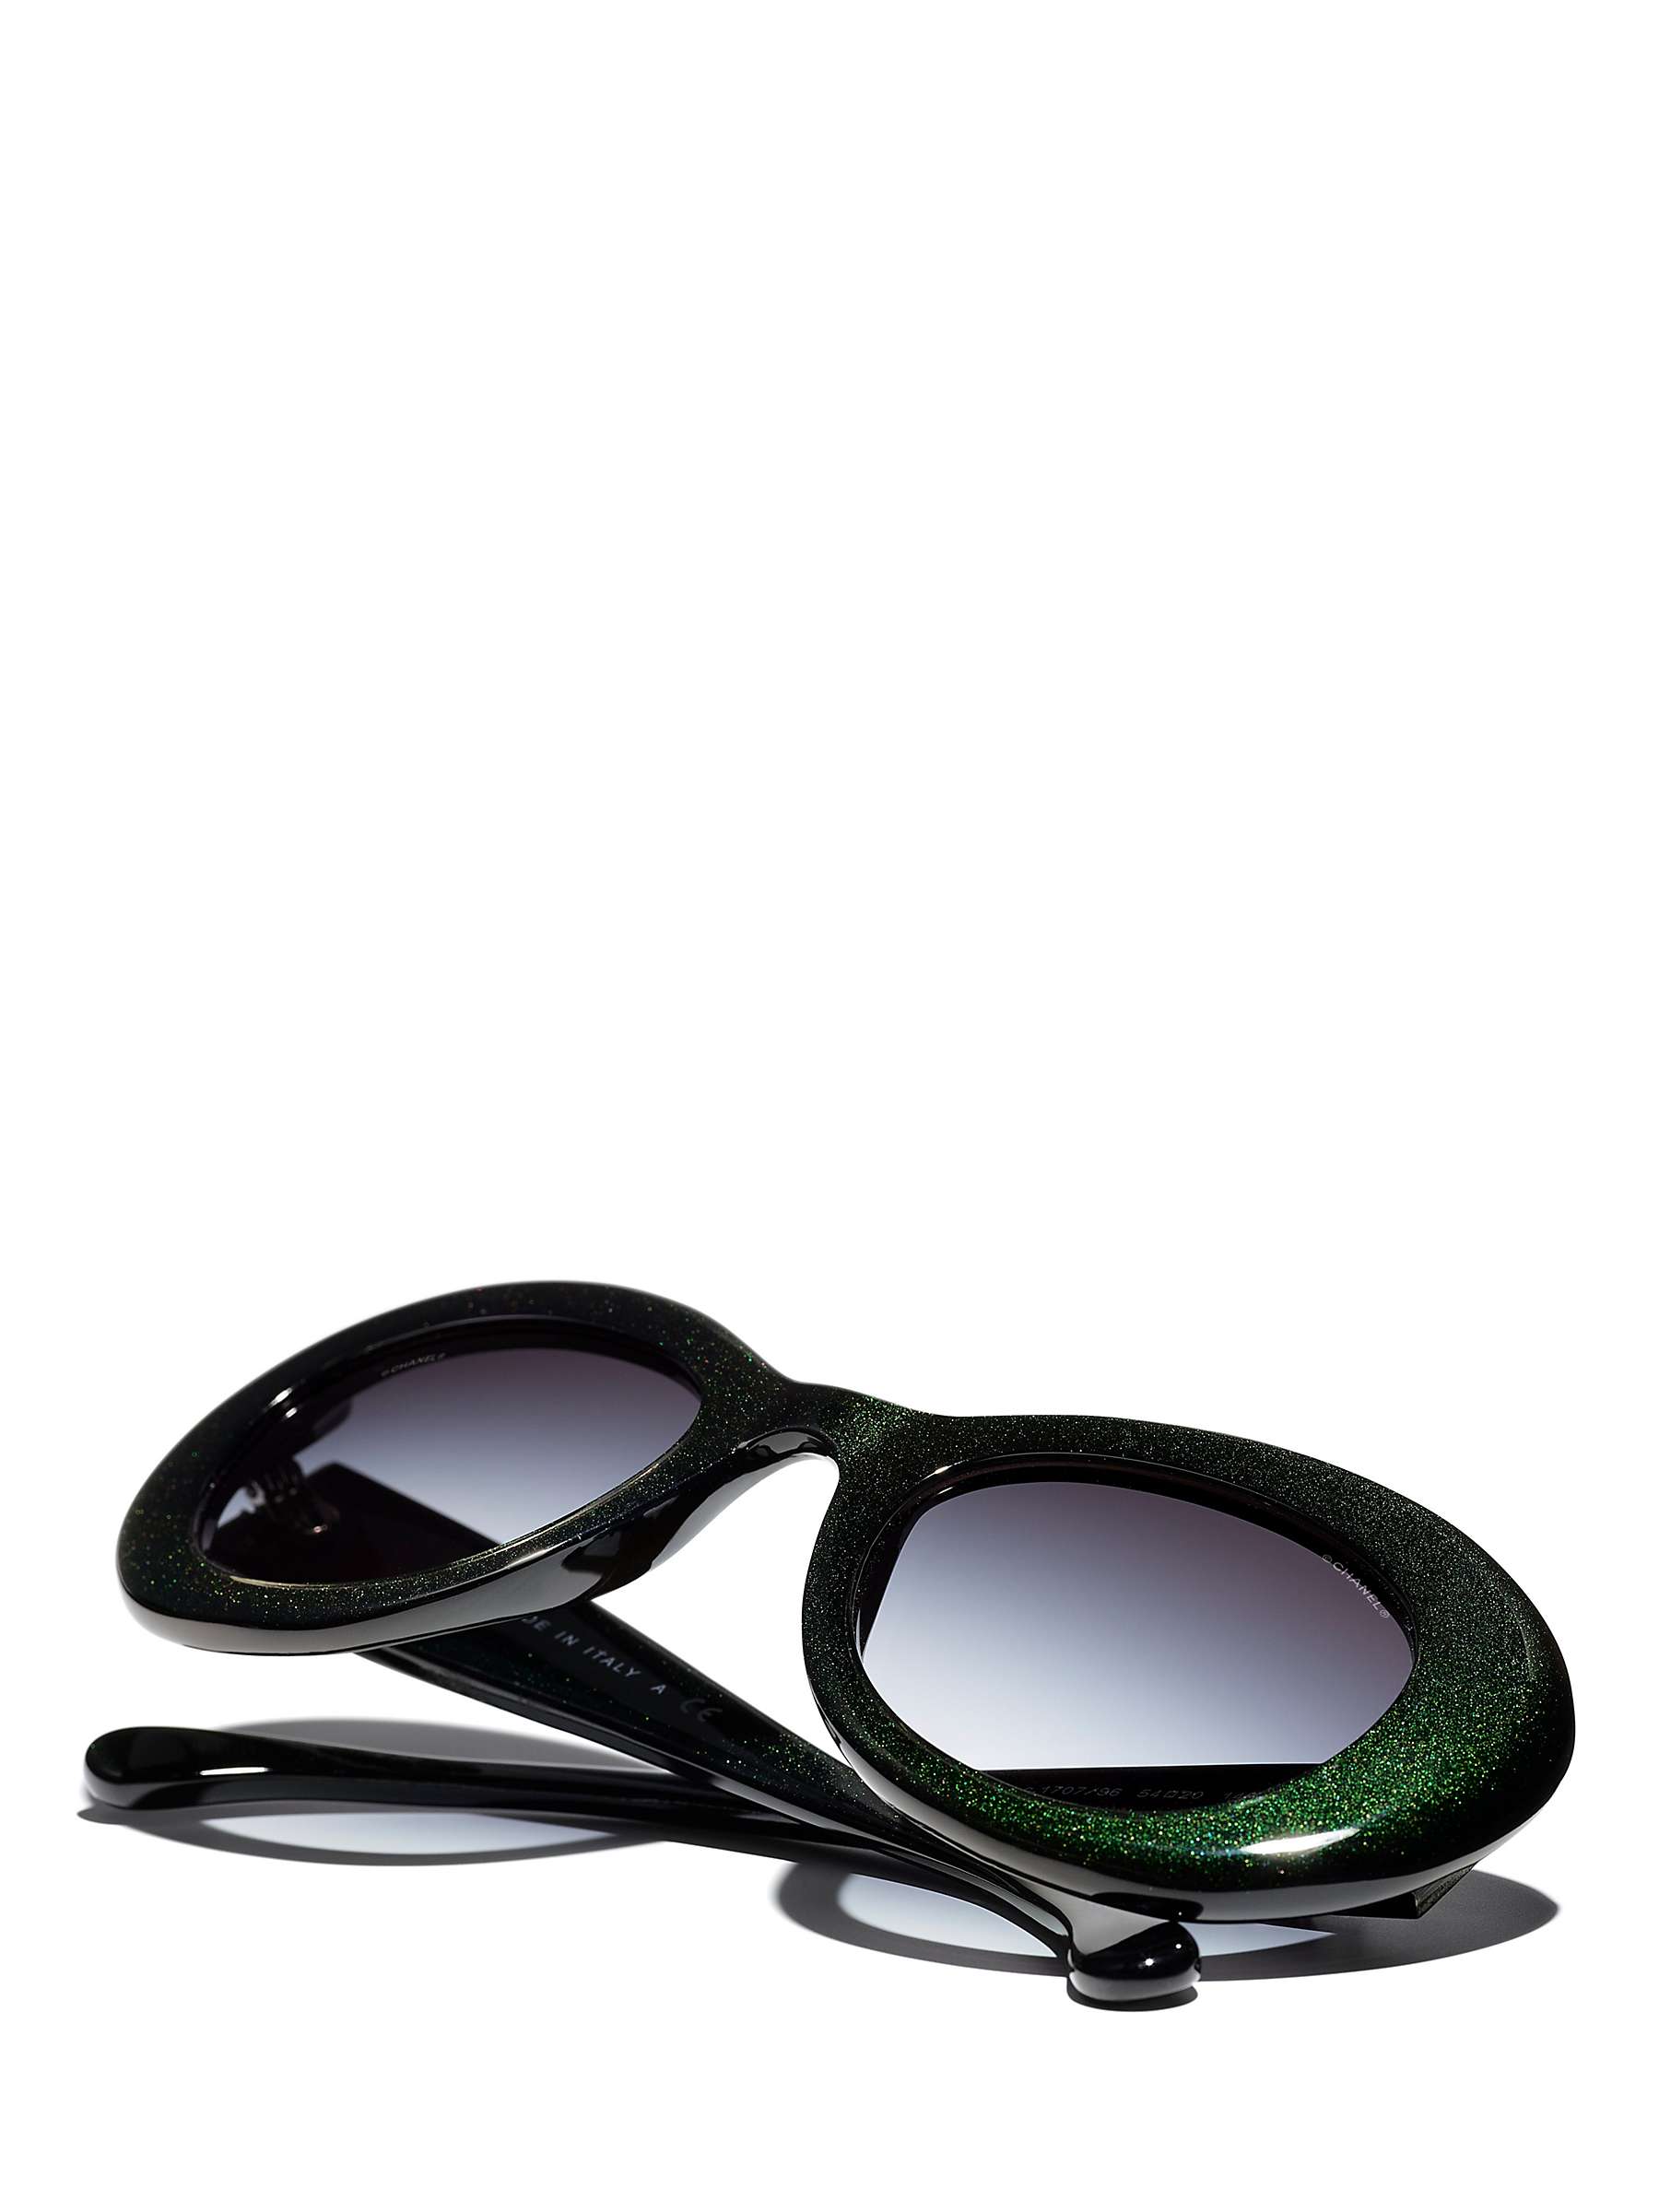 Buy CHANEL Oval Sunglasses CH5469B Iridescent Green/Blue Gradient Online at johnlewis.com